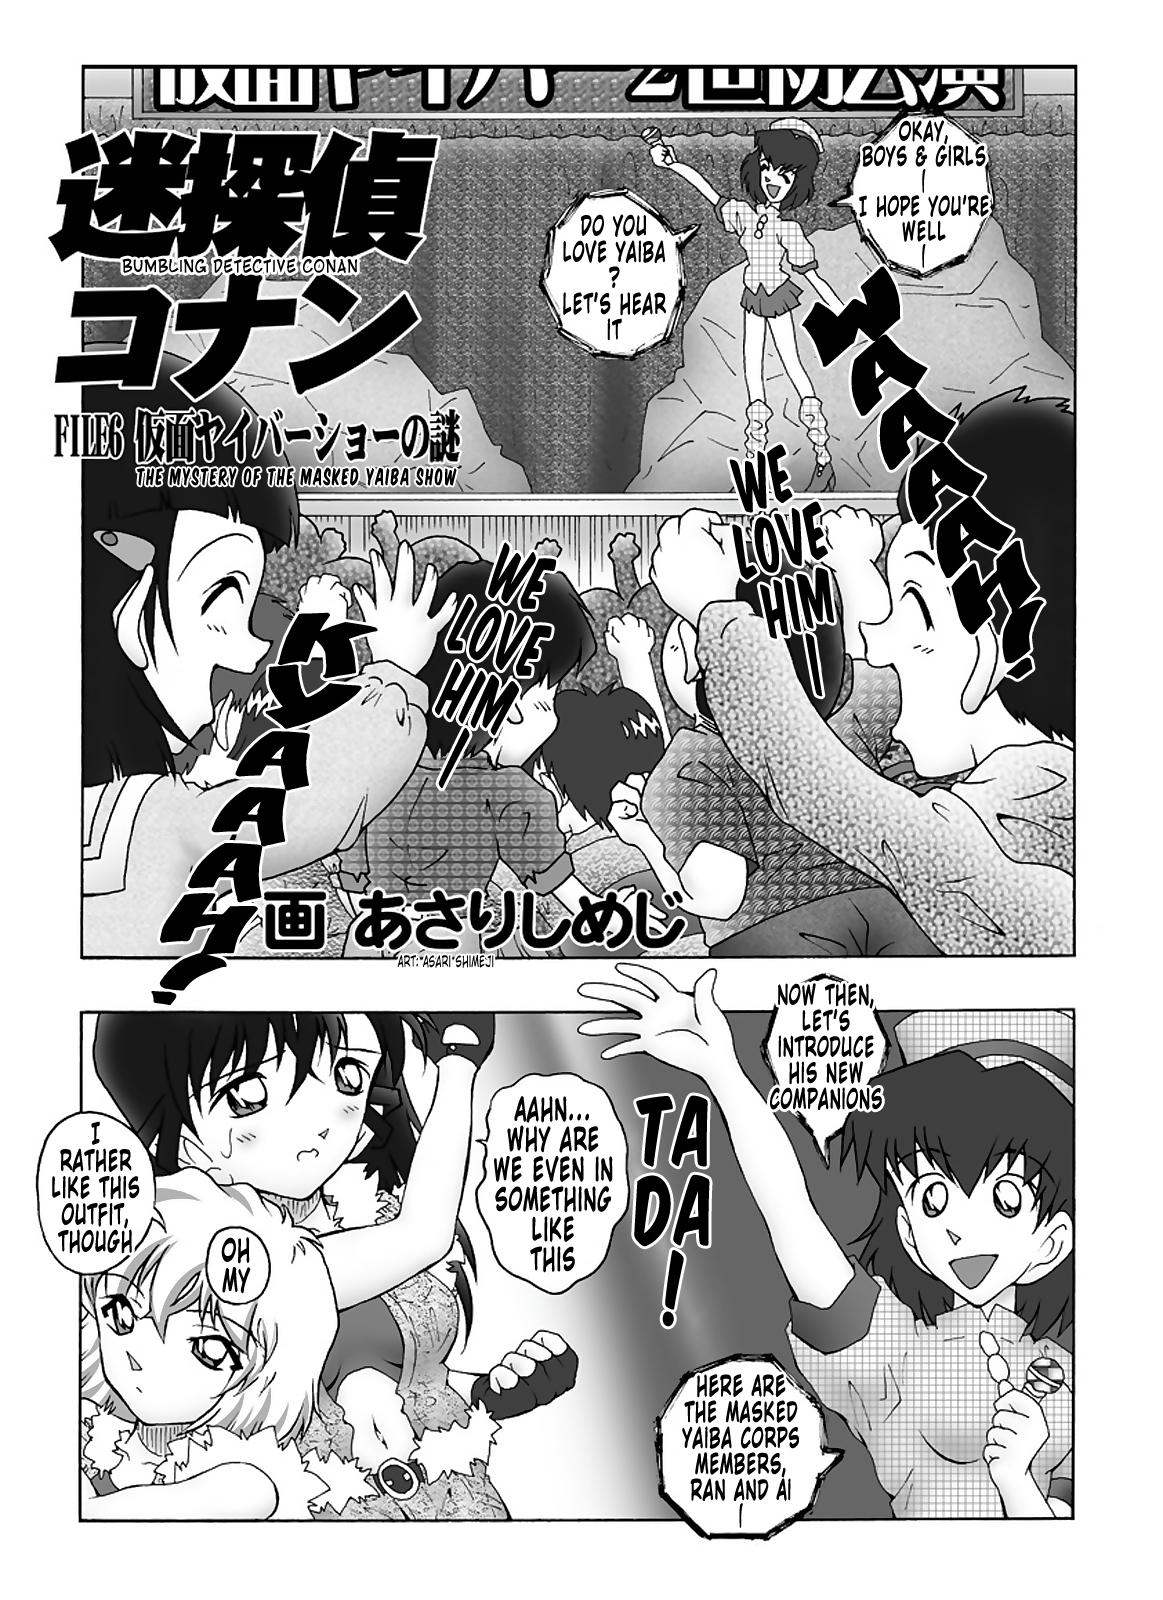 Hardsex Bumbling Detective Conan - File 6: The Mystery Of The Masked Yaiba Show - Detective conan Brasileira - Page 4